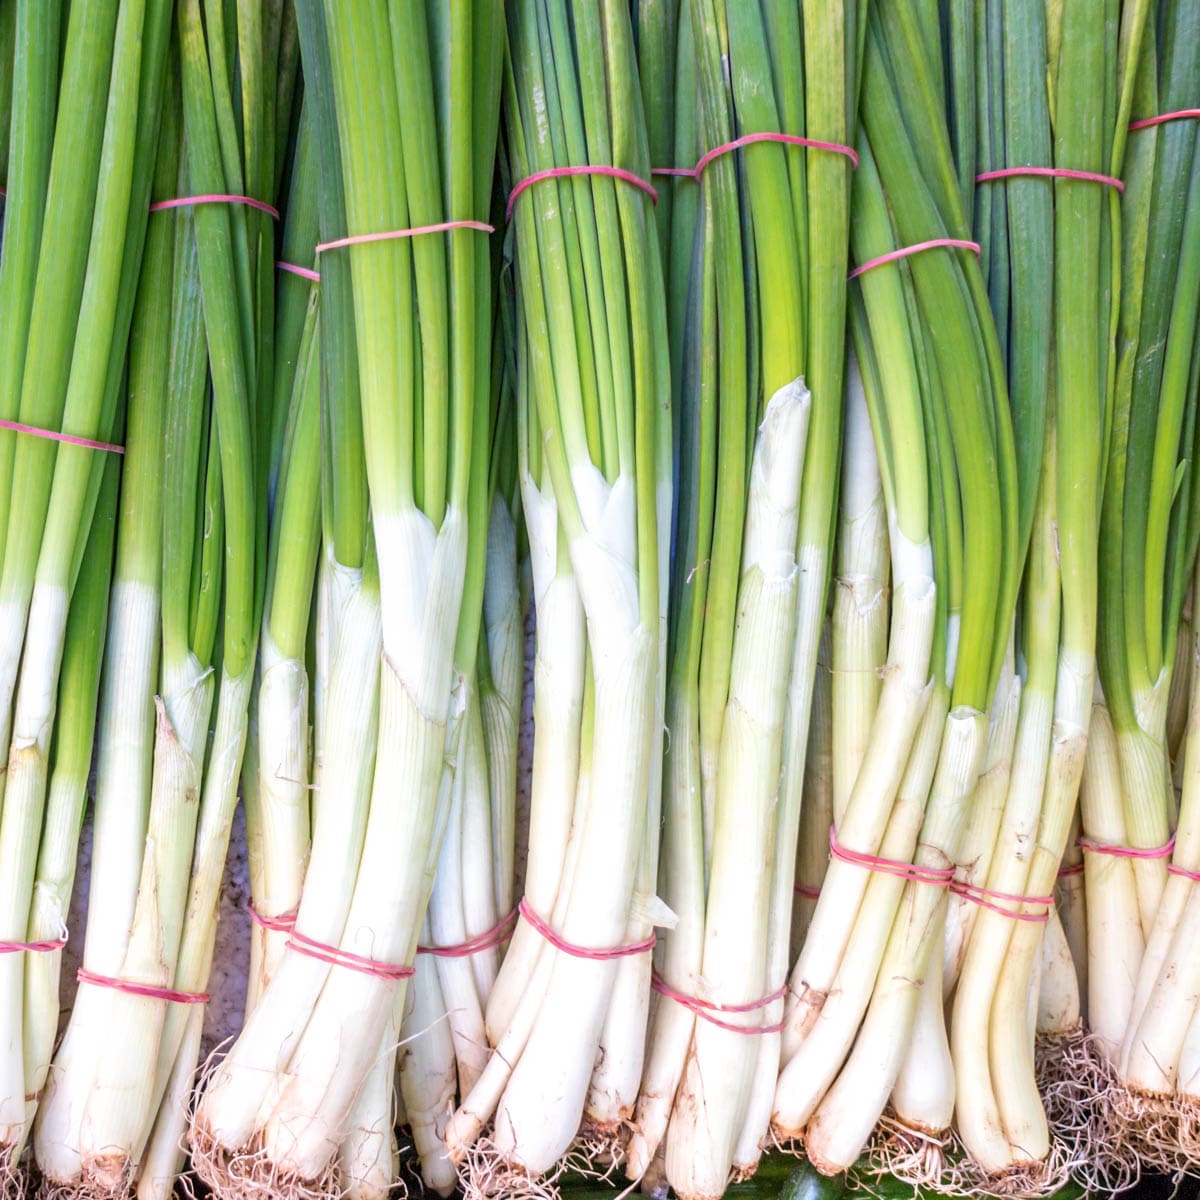 Bunches of green onions laying next to each other